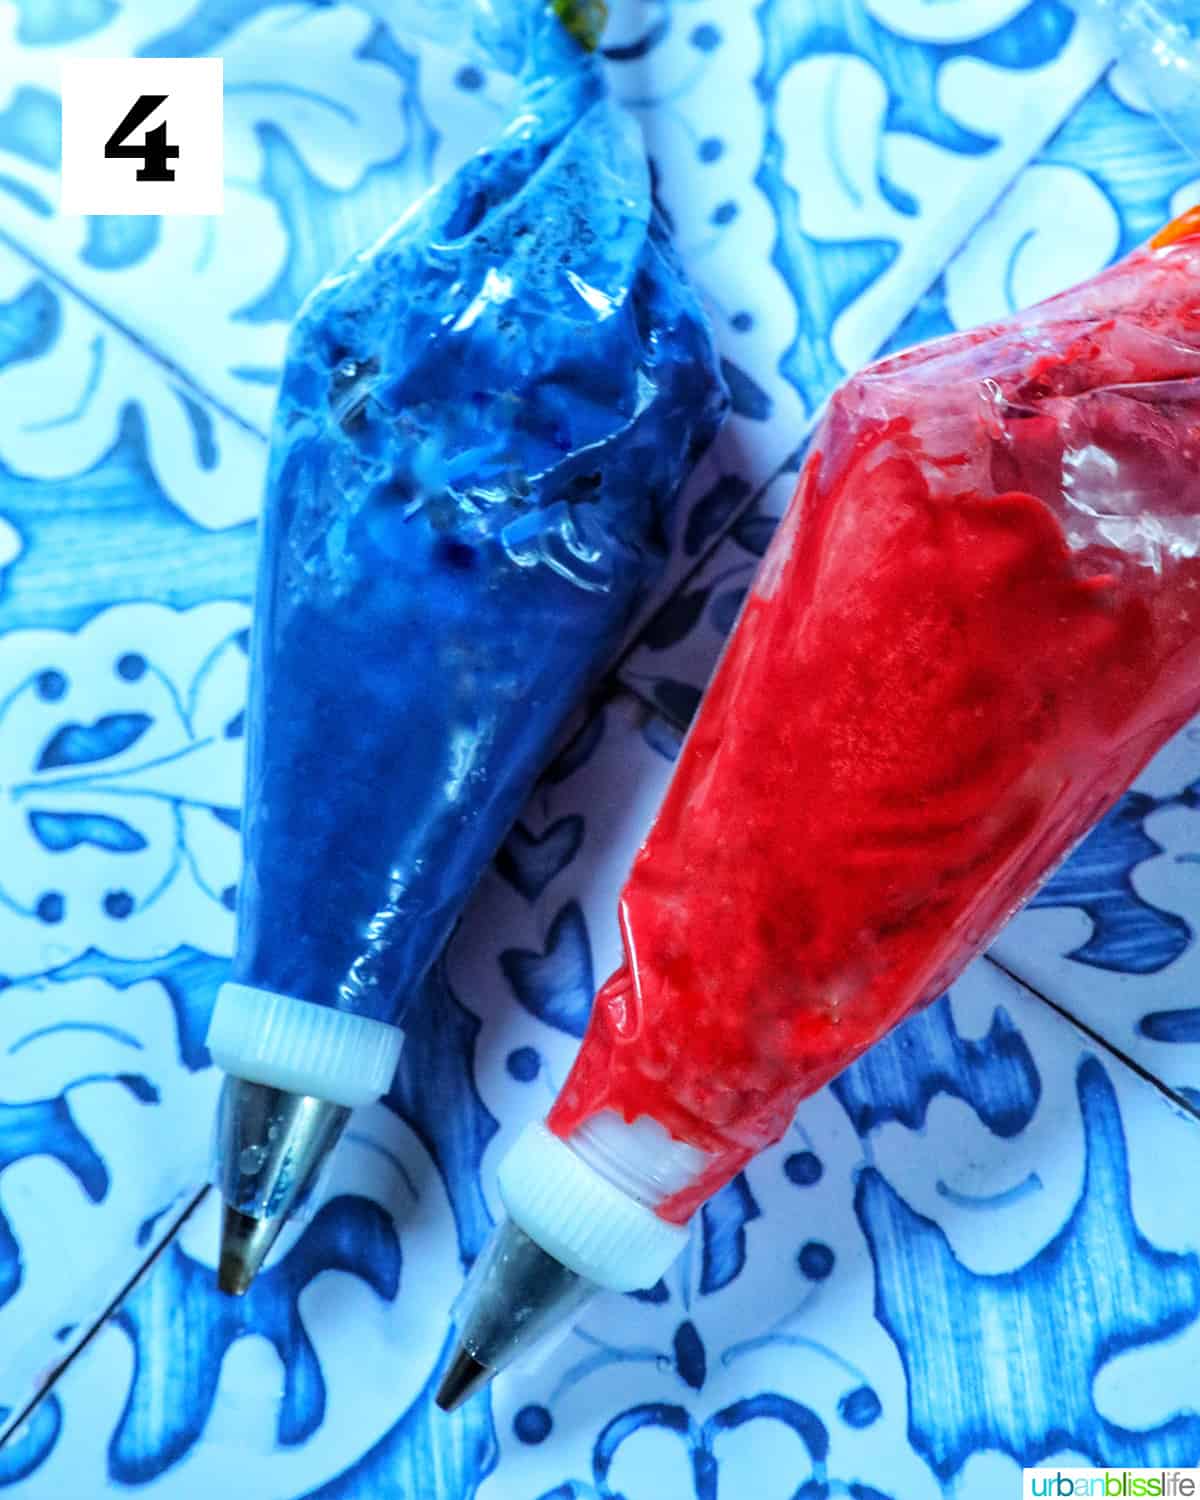 red and blue candy melts melted and in piping bags on a blue and white table.